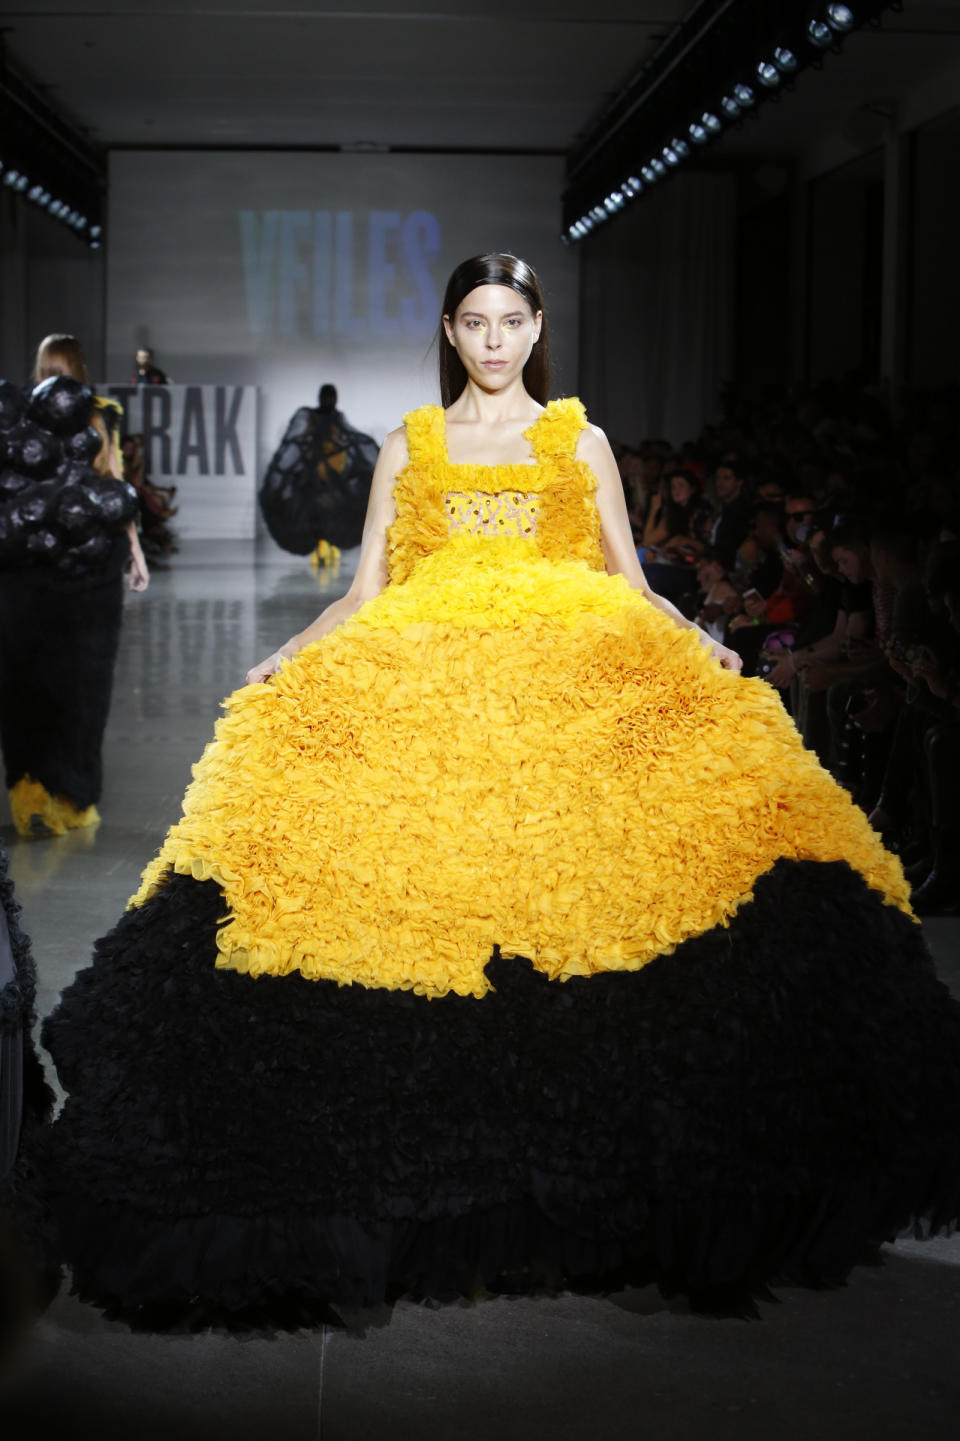 Yellow and Black Dress With Ball Skirt by David Ferreira